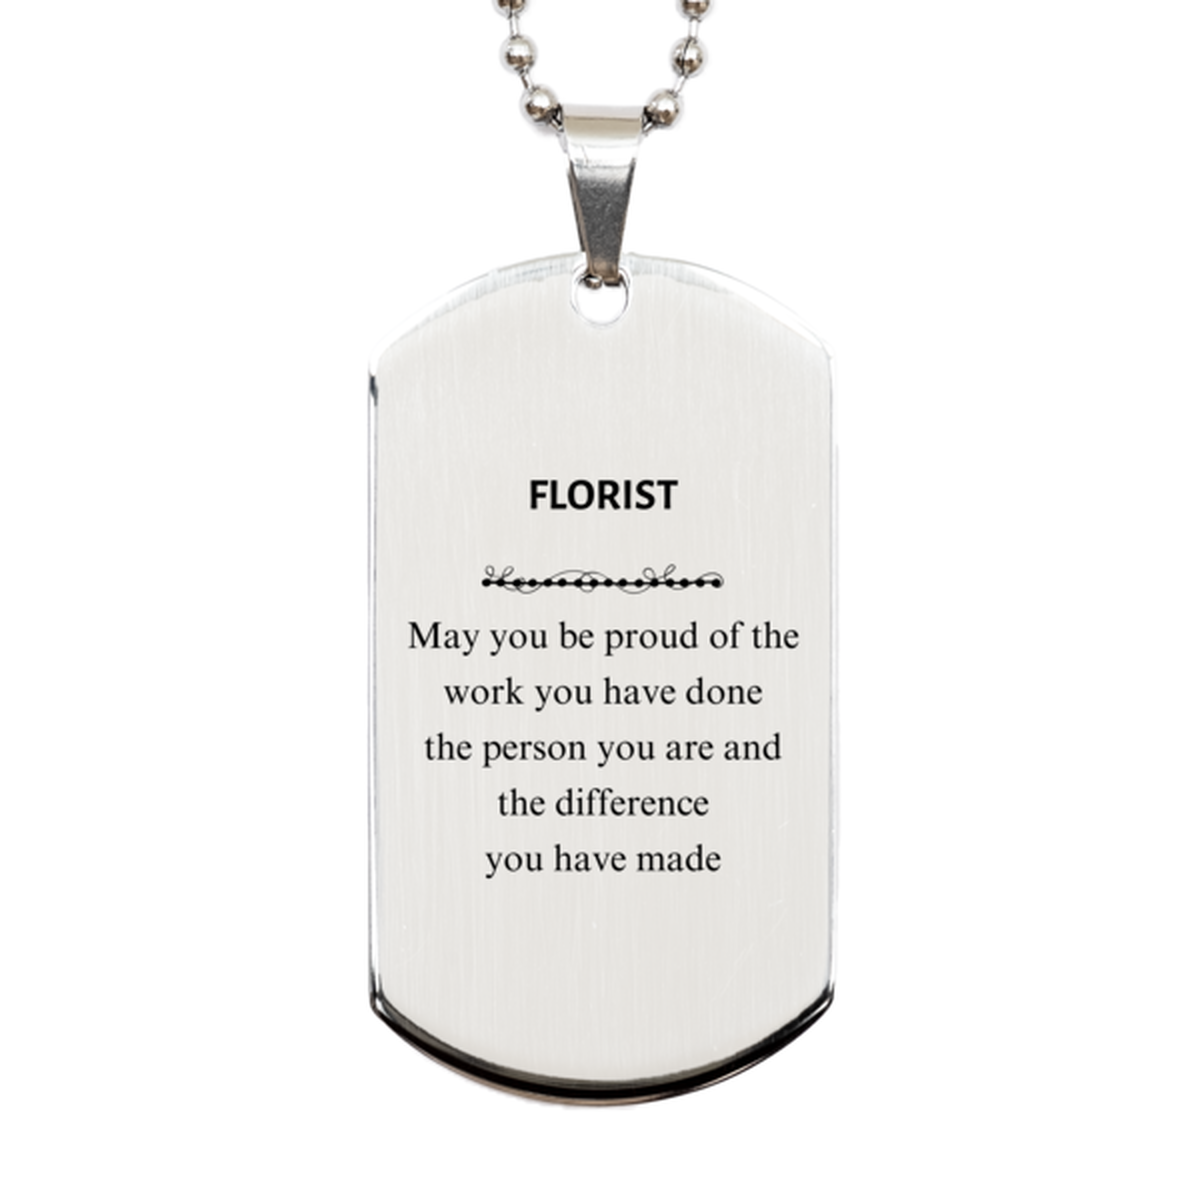 Florist May you be proud of the work you have done, Retirement Florist Silver Dog Tag for Colleague Appreciation Gifts Amazing for Florist